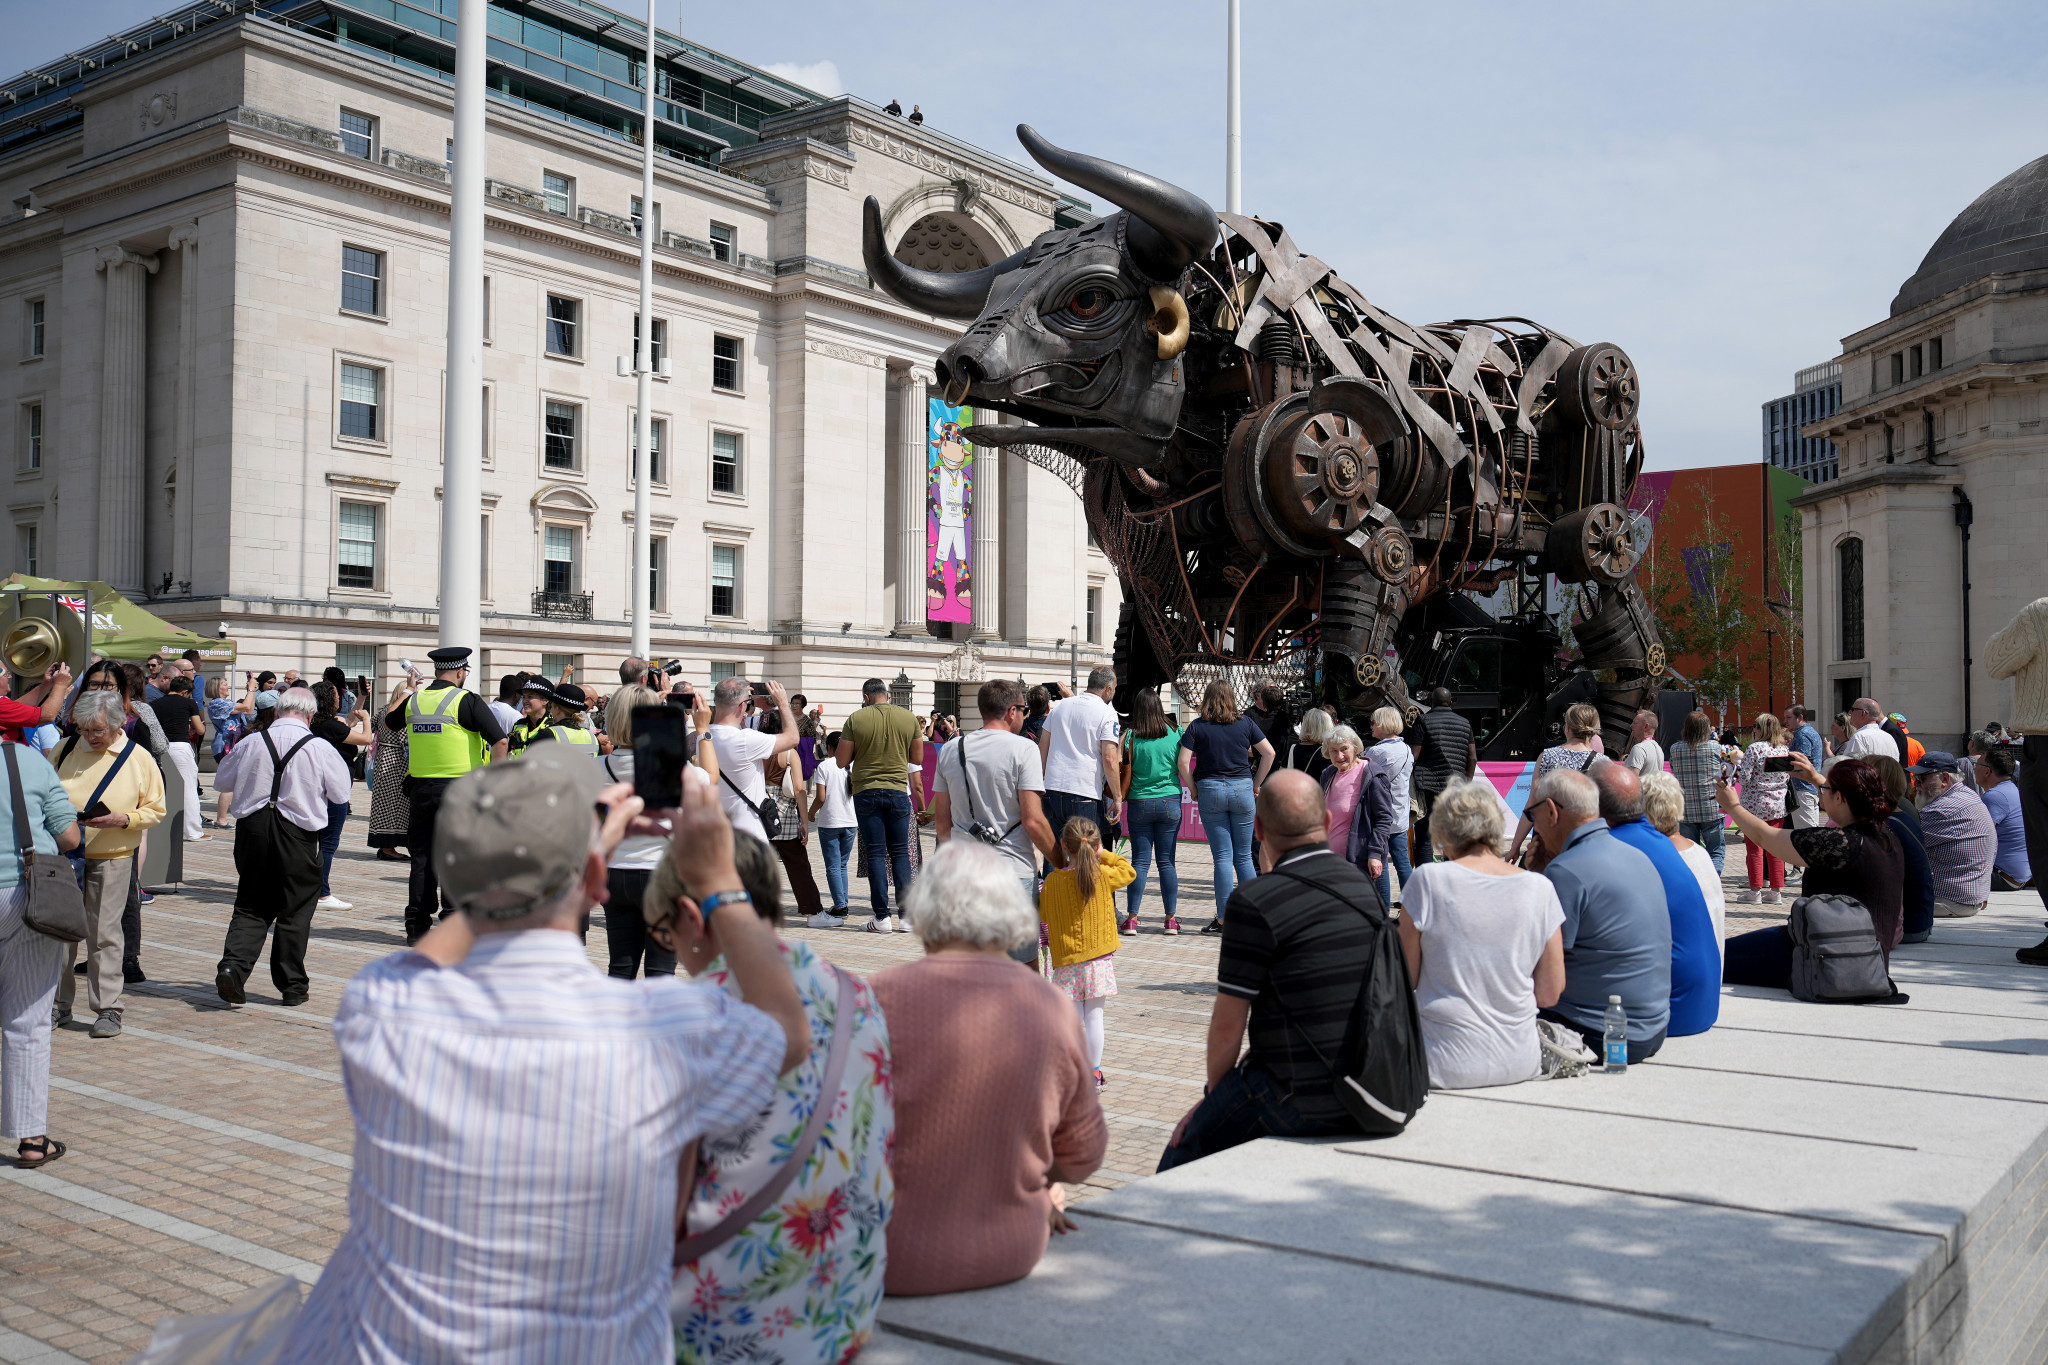 Centenary Square is set to remain as the home for Birmingham's Raging Bull until the end of September ©Getty Images